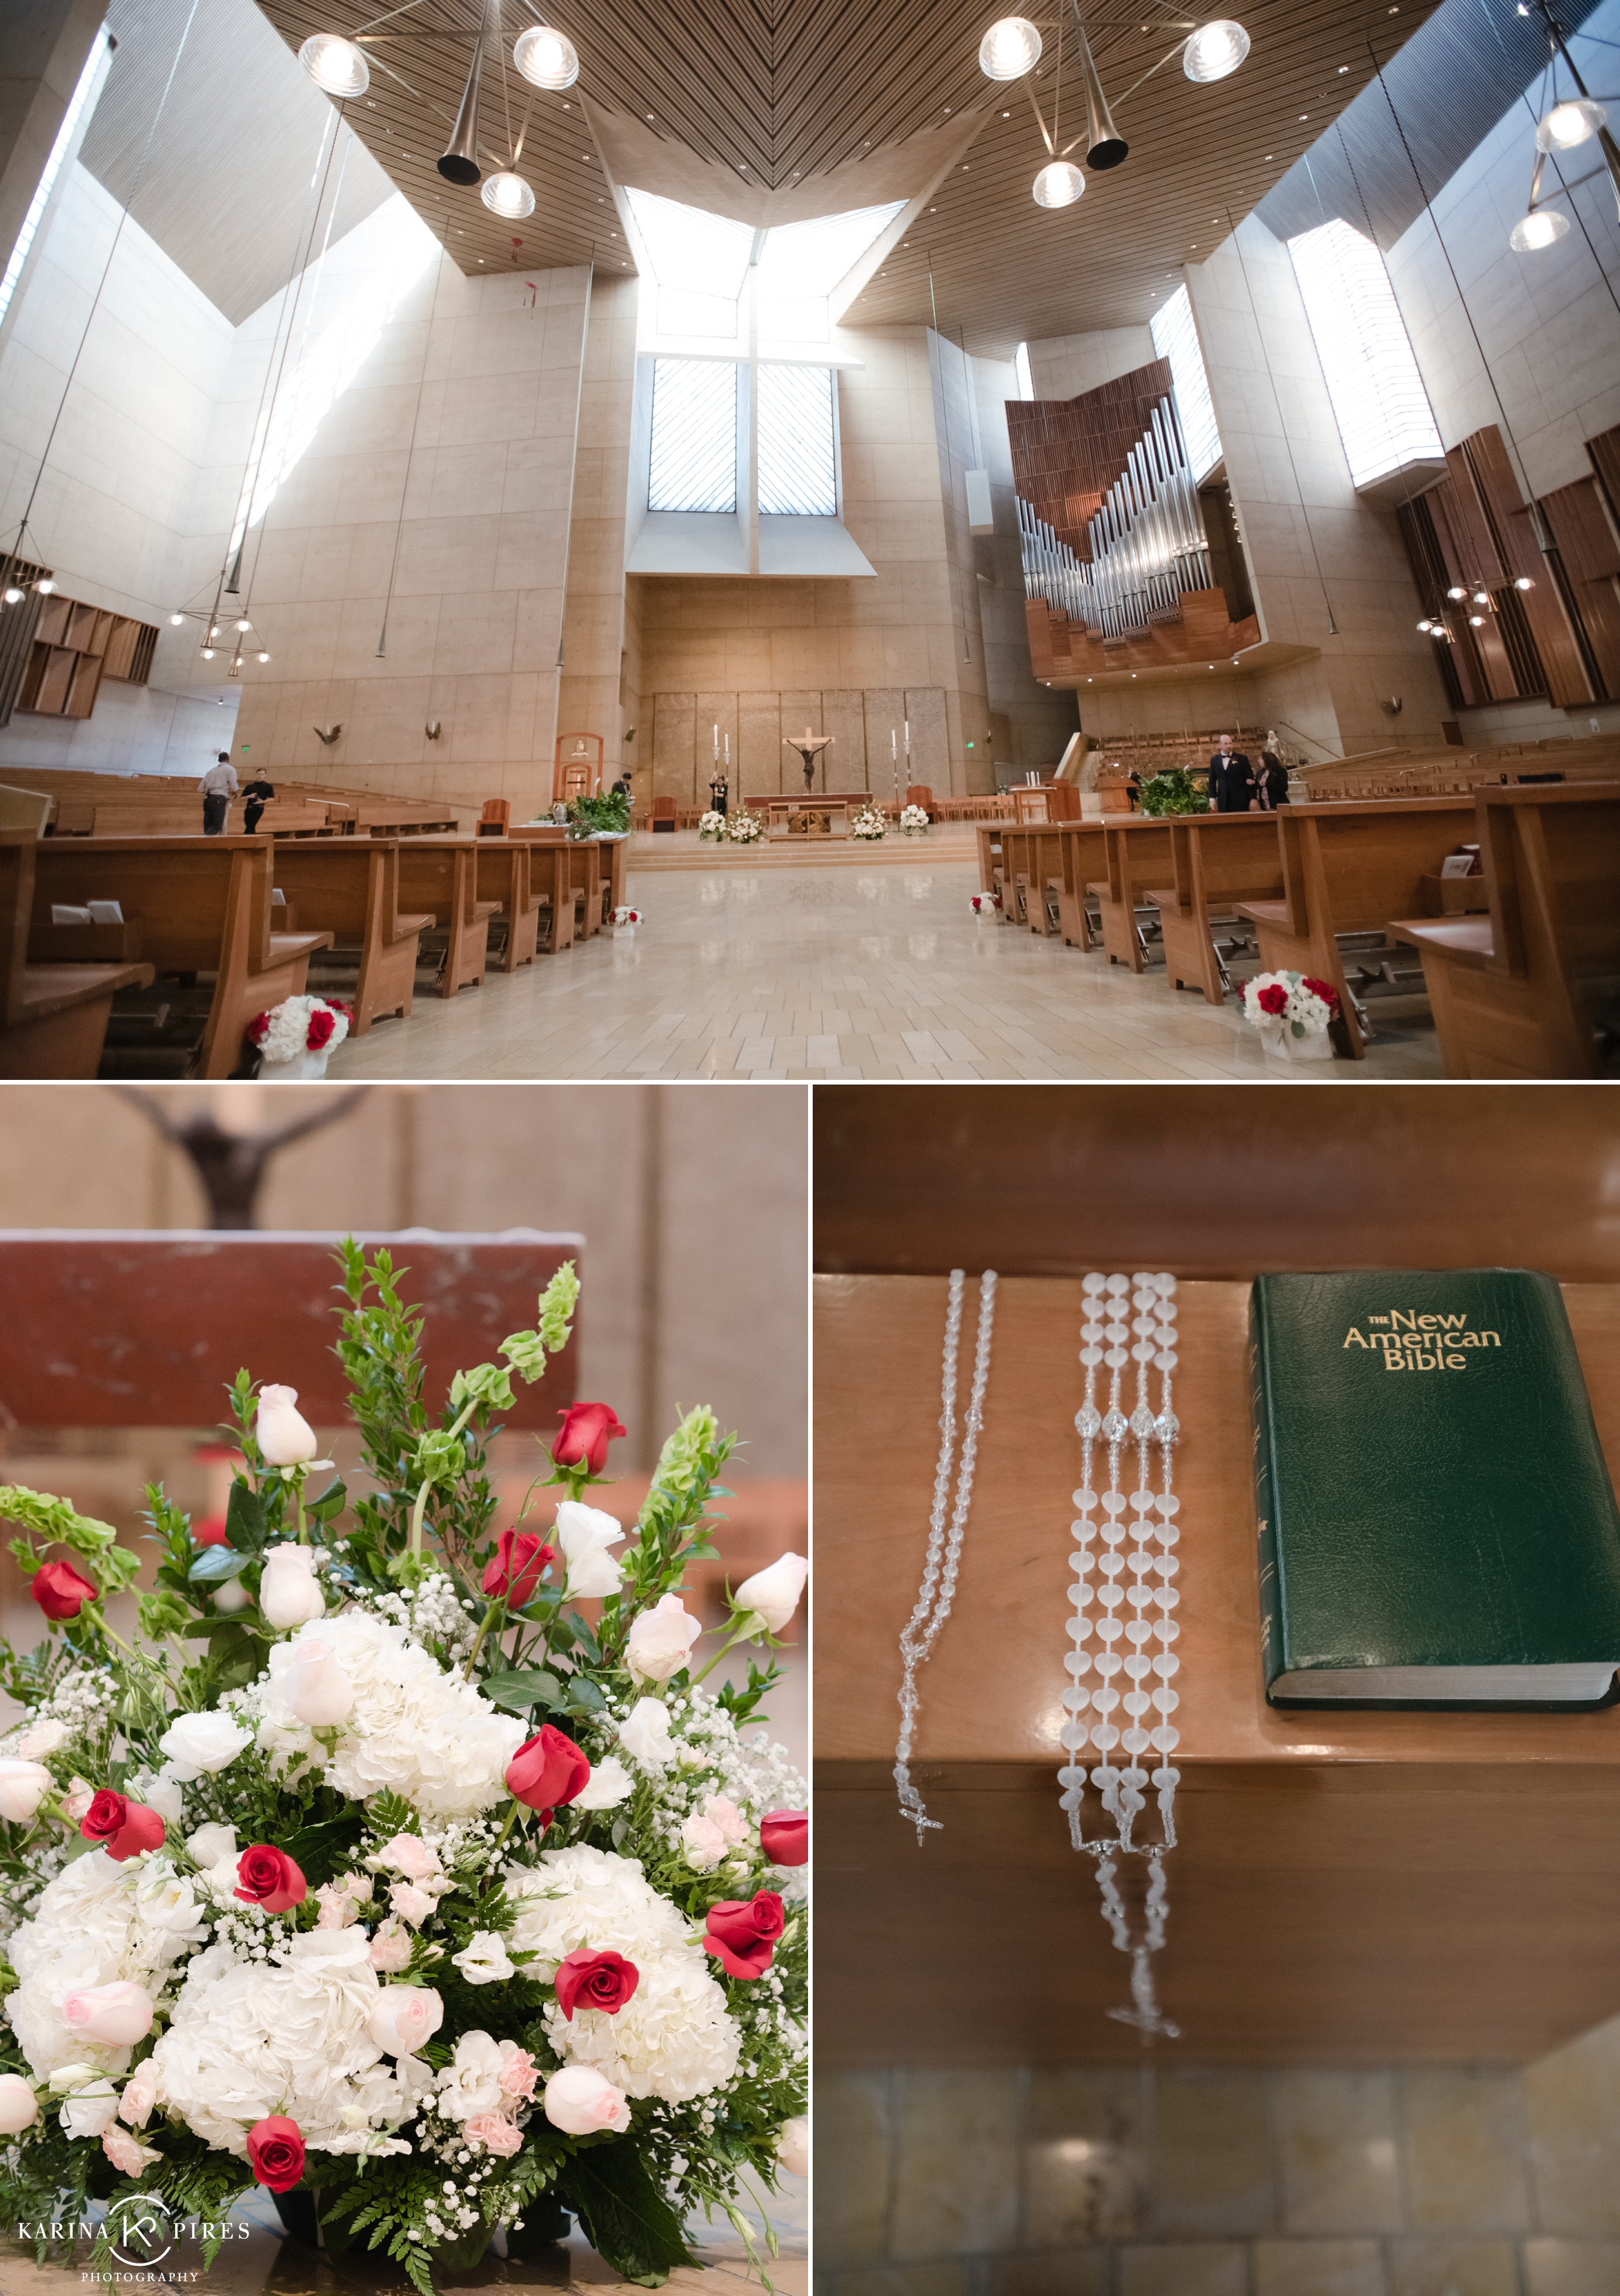 Los Angeles Catholic Wedding at Our Lady of the Angels – Karina Pires Photography